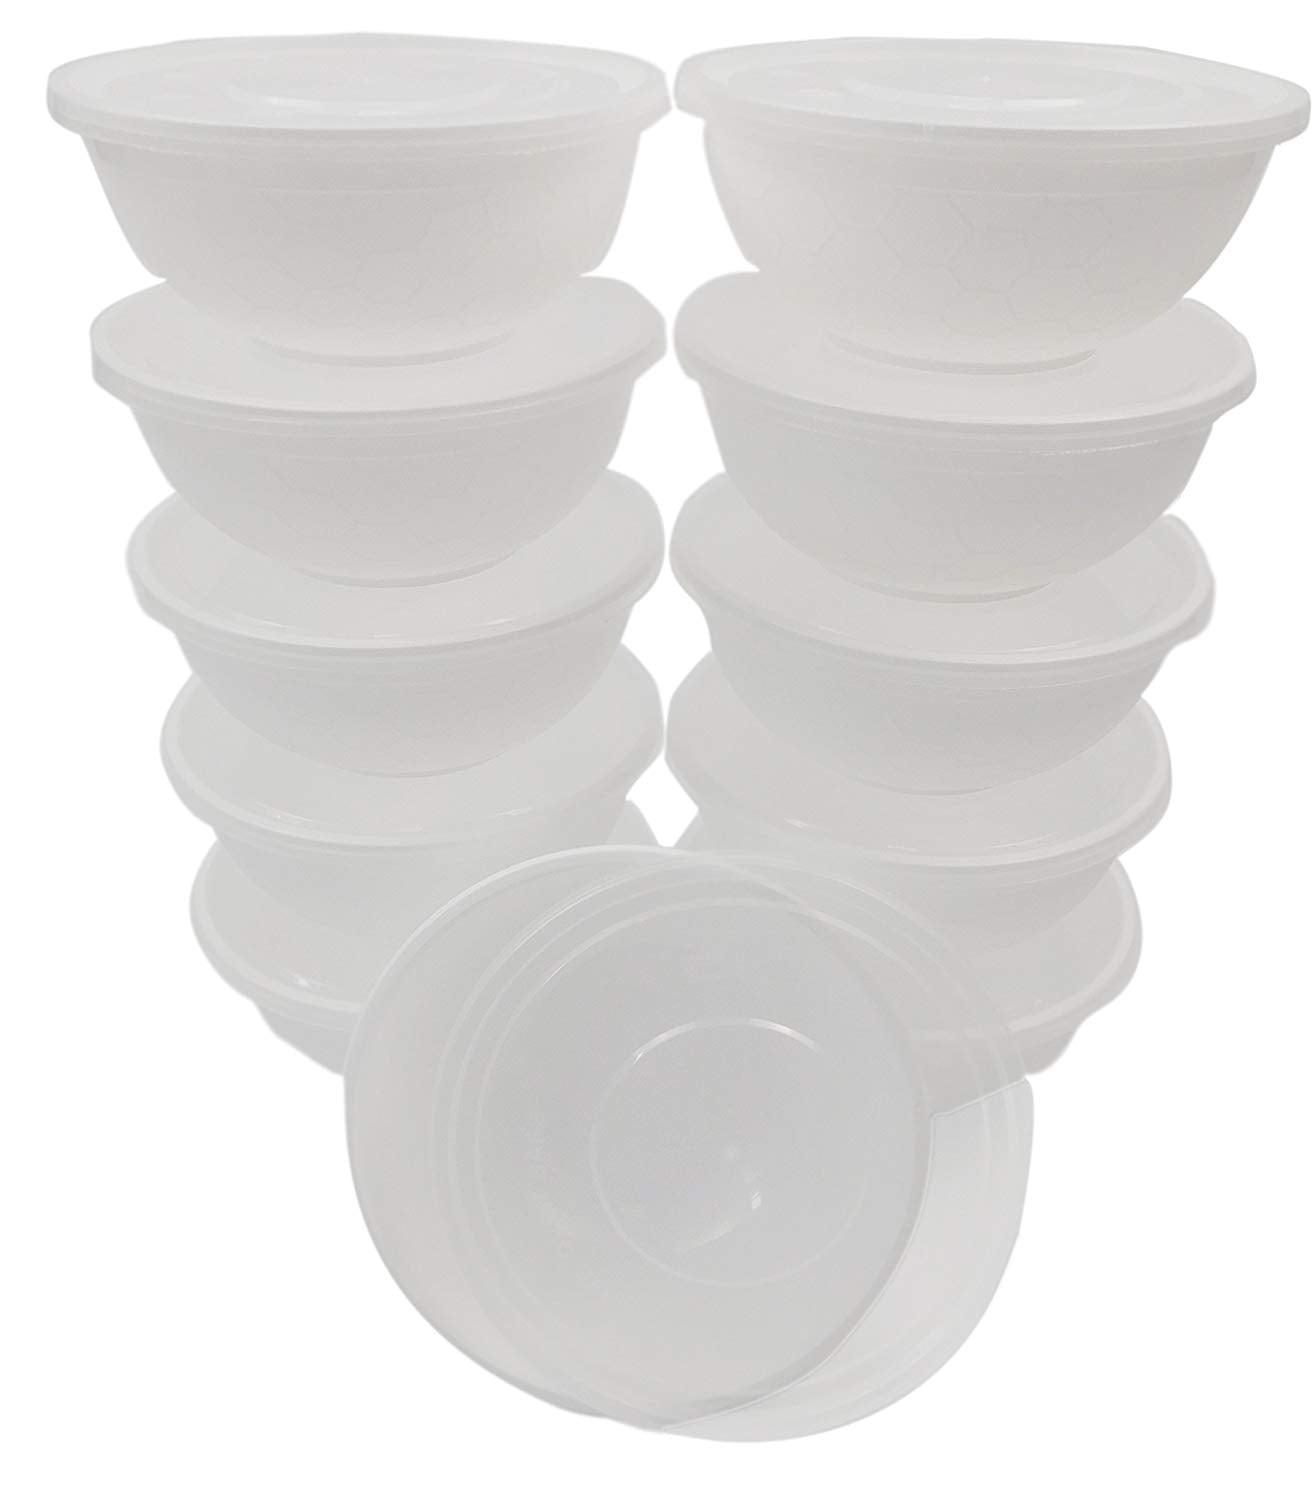 Table To Go 300-Pack Storage Noodle Bowls with Lids (1